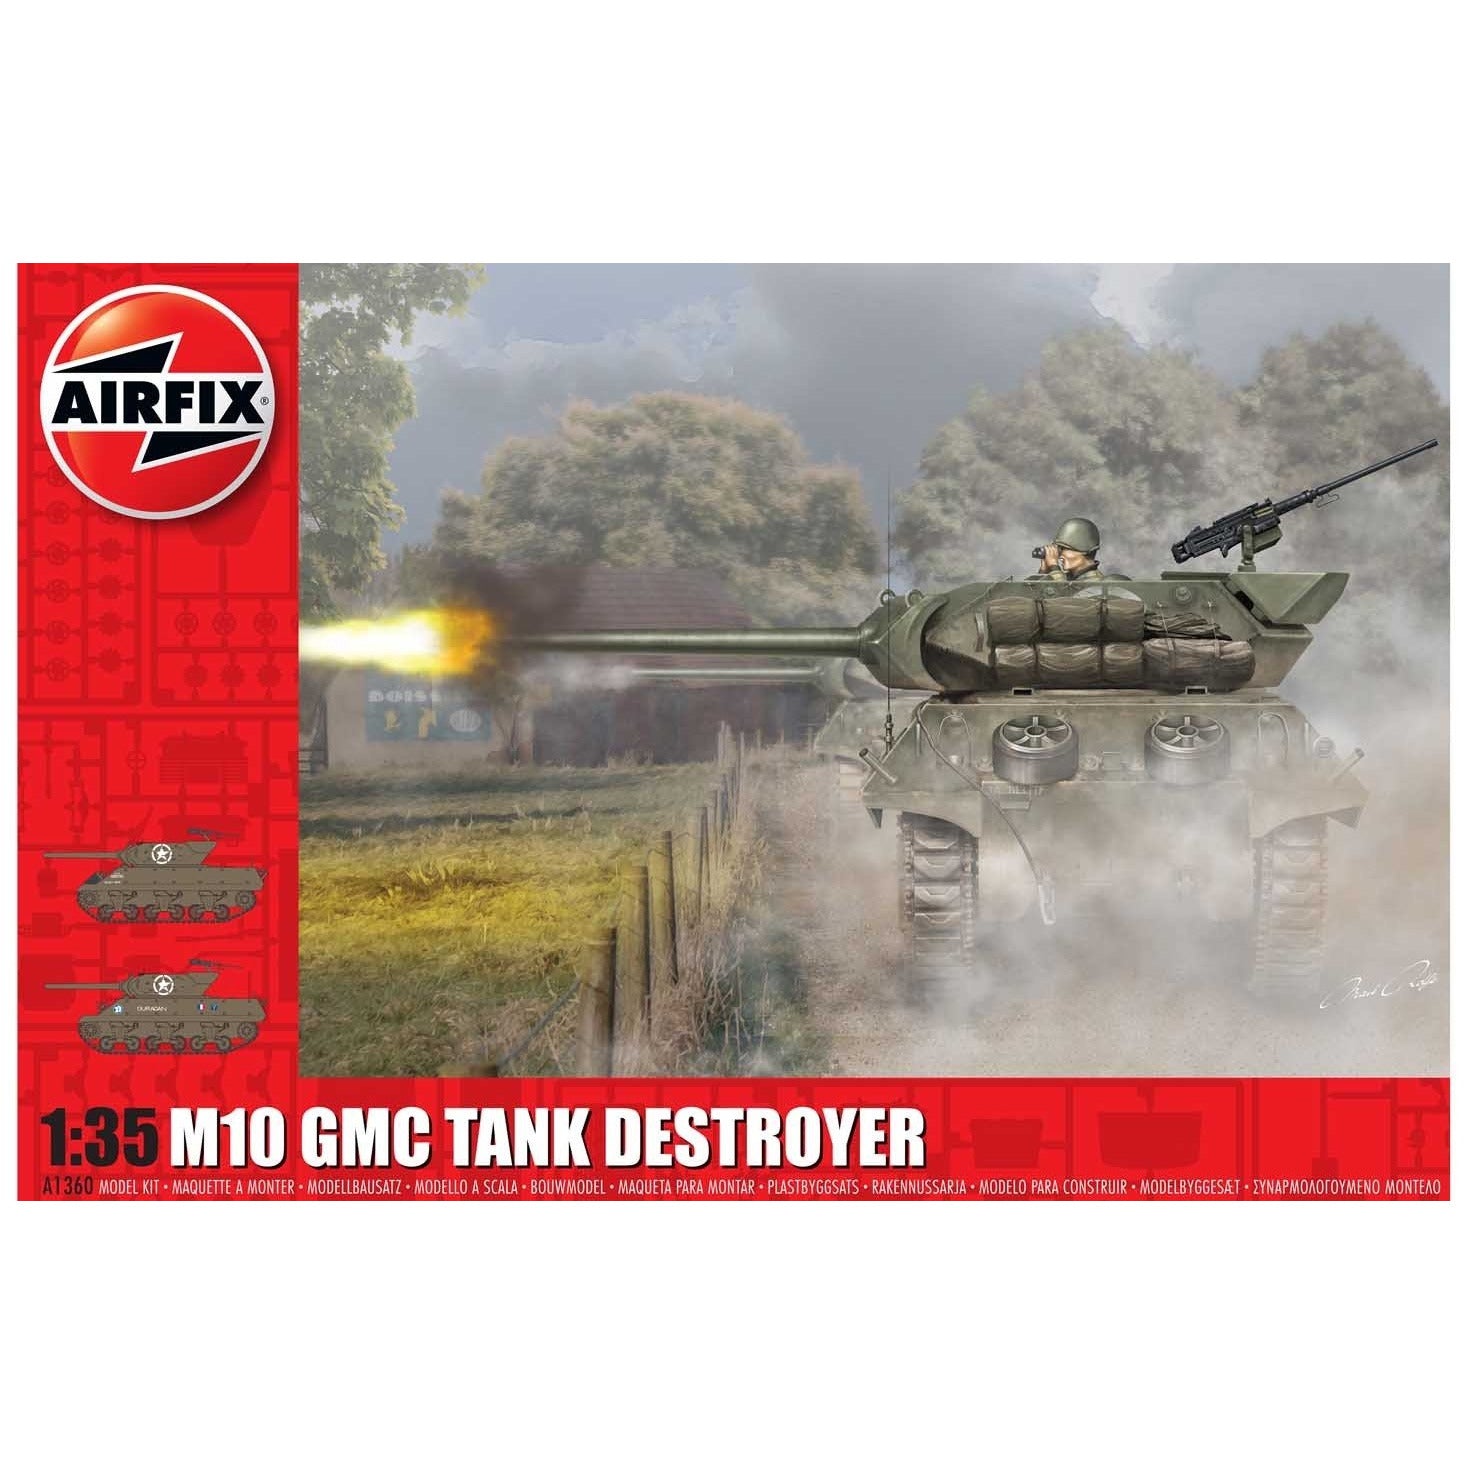 M10 GMC Tank Destroyer US Army 1/35 by Airfix